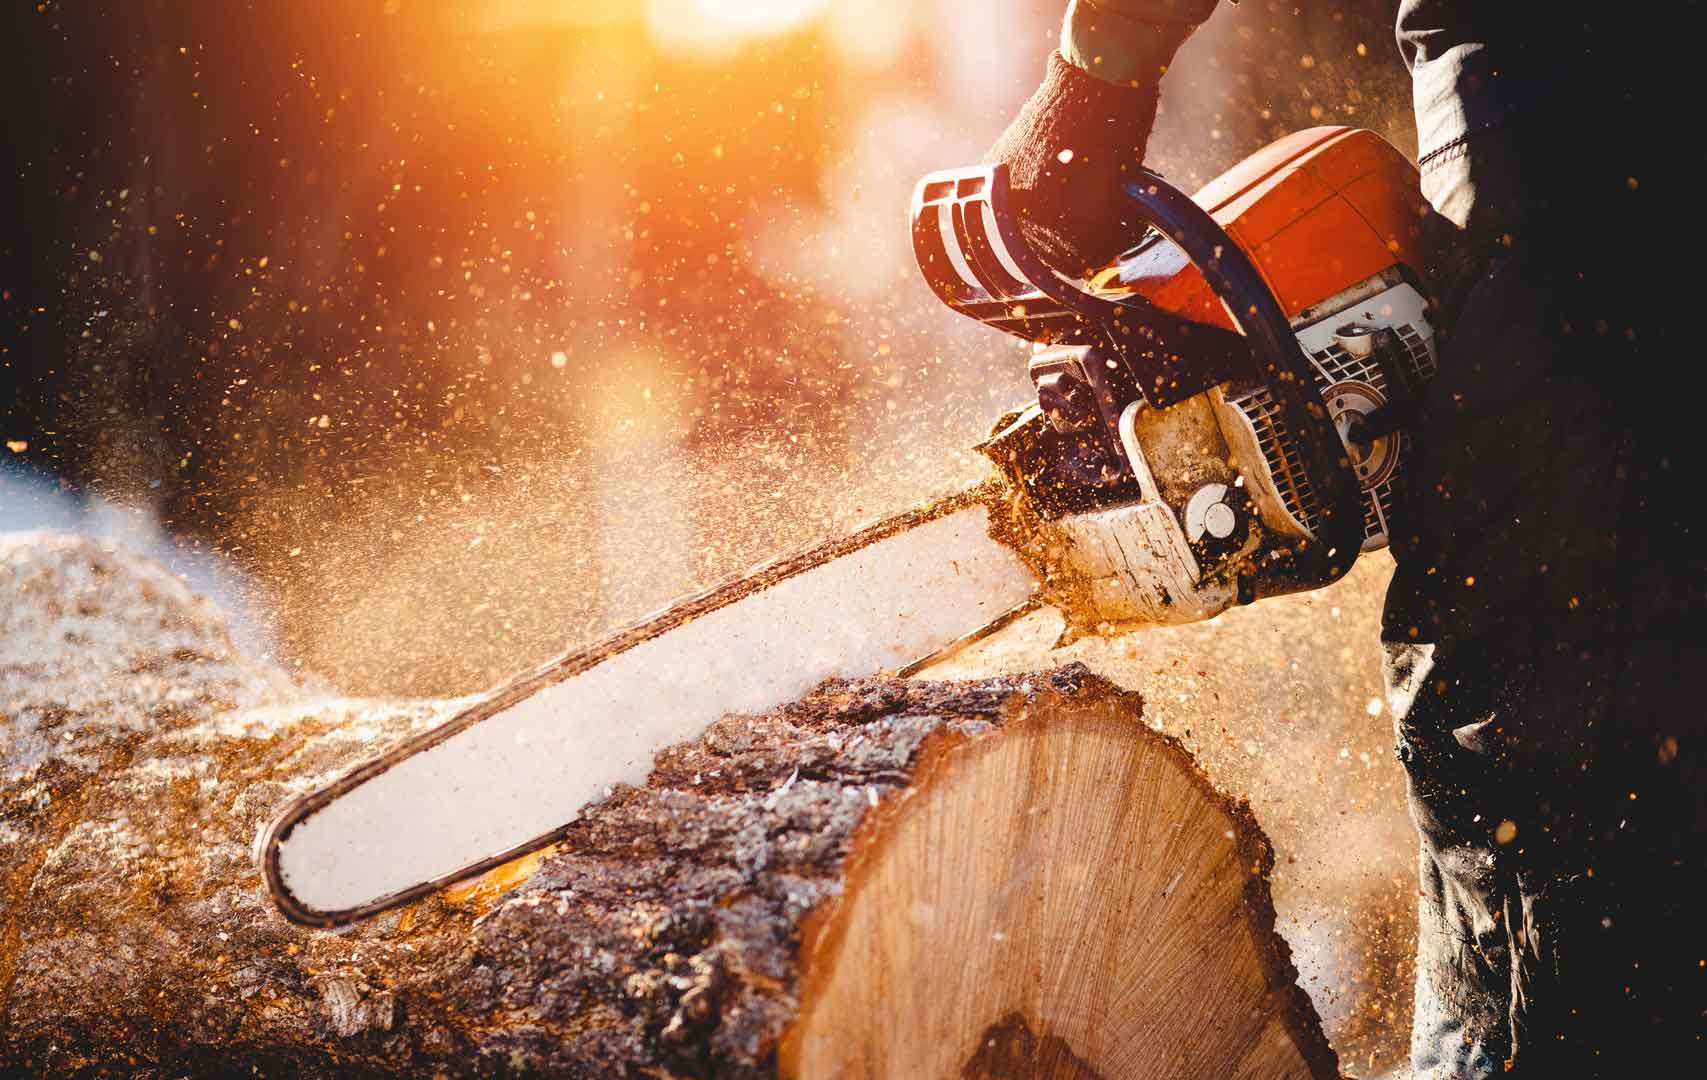 chainsaw training melbourne